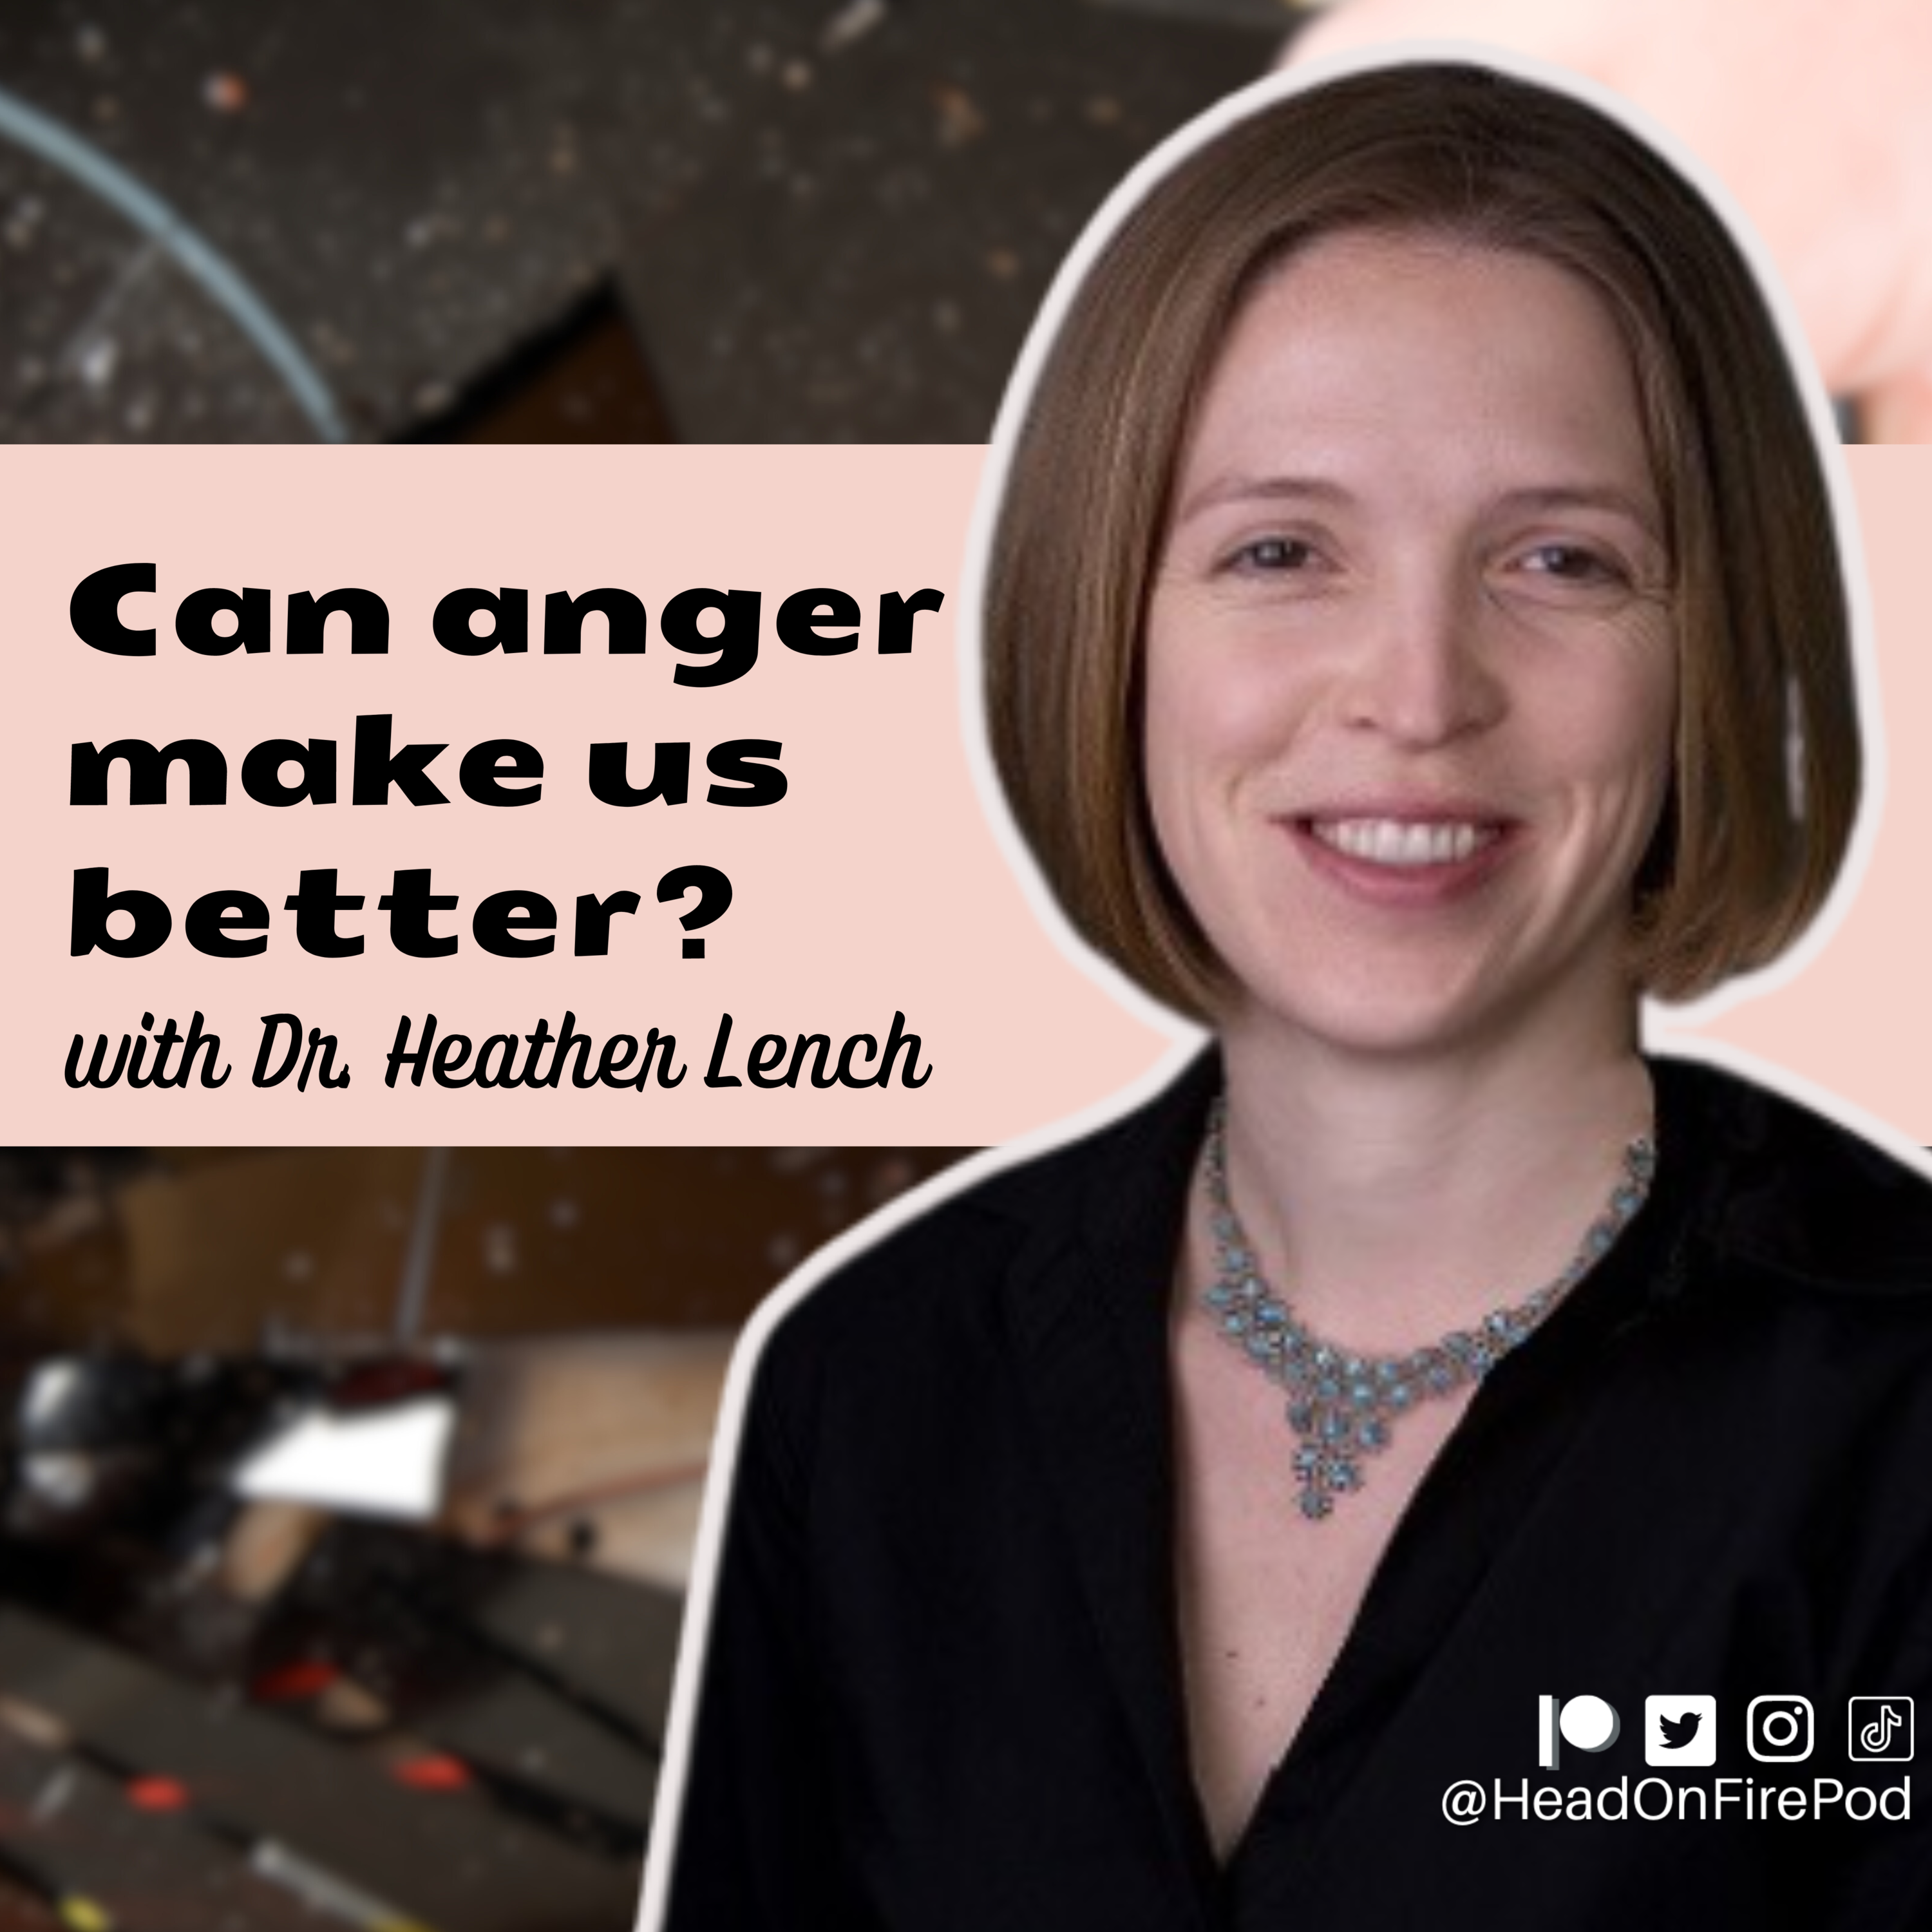 Can anger make us better? with Dr. Heather Lench